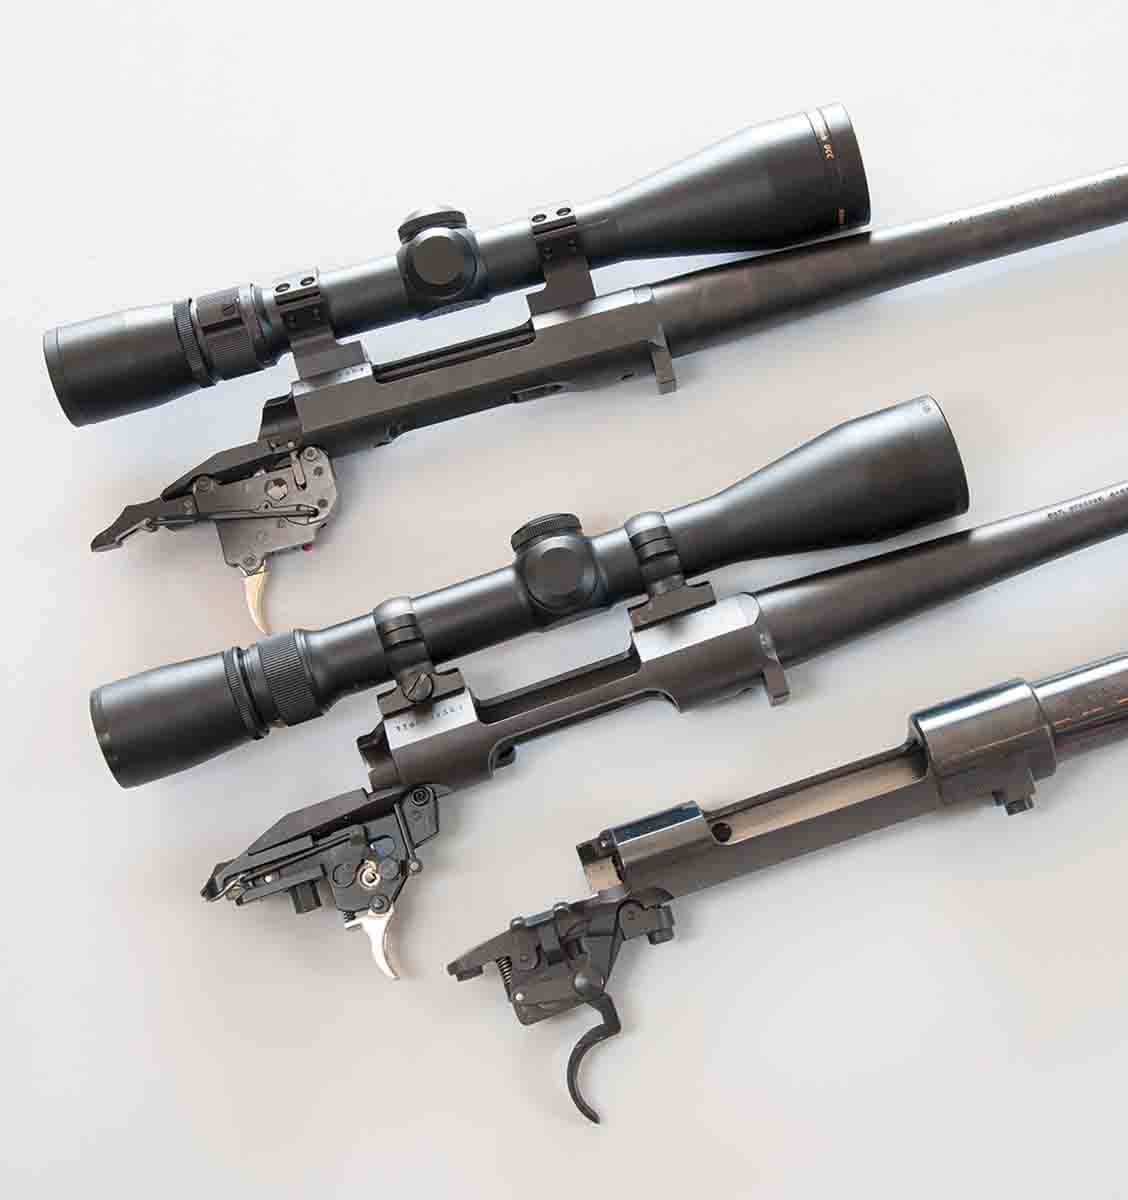 Browning receiver designs have changed over the years. From top down, these include the X-Bolt, the A-Bolt II and a 1960’s Safari High Power built by Fabrique Nationale.